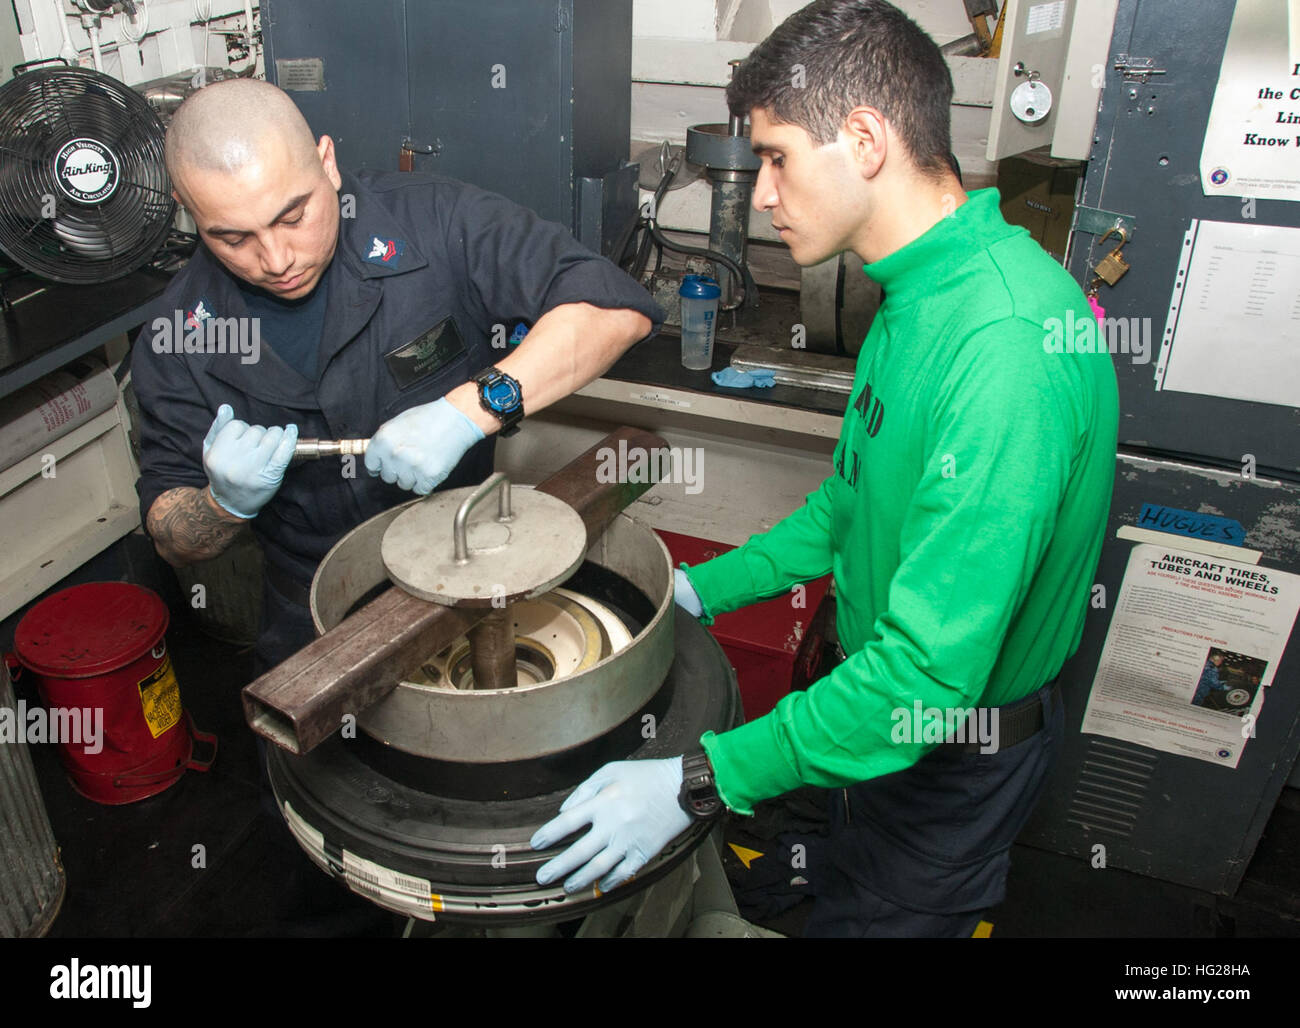 150703-N-YD641-061 PHILIPPINE SEA (July 3, 2015) Aviation Structural Mechanic 2nd Class Ivan Ramirez, from San Diego, left, and Aviation Structural Mechanic Airman Sergio Castan assembles a nose mount tire in the wheel and tire shop aboard the Nimitz-class aircraft carrier USS George Washington (CVN 73). George Washington and its embarked air wing, Carrier Air Wing (CVW) 5, are on patrol in the 7th Fleet area of responsibility supporting security and stability in the Indo-Asia-Pacific region. George Washington will conduct a hull-swap with the Nimitz-class aircraft carrier USS Ronald Reagan (C Stock Photo